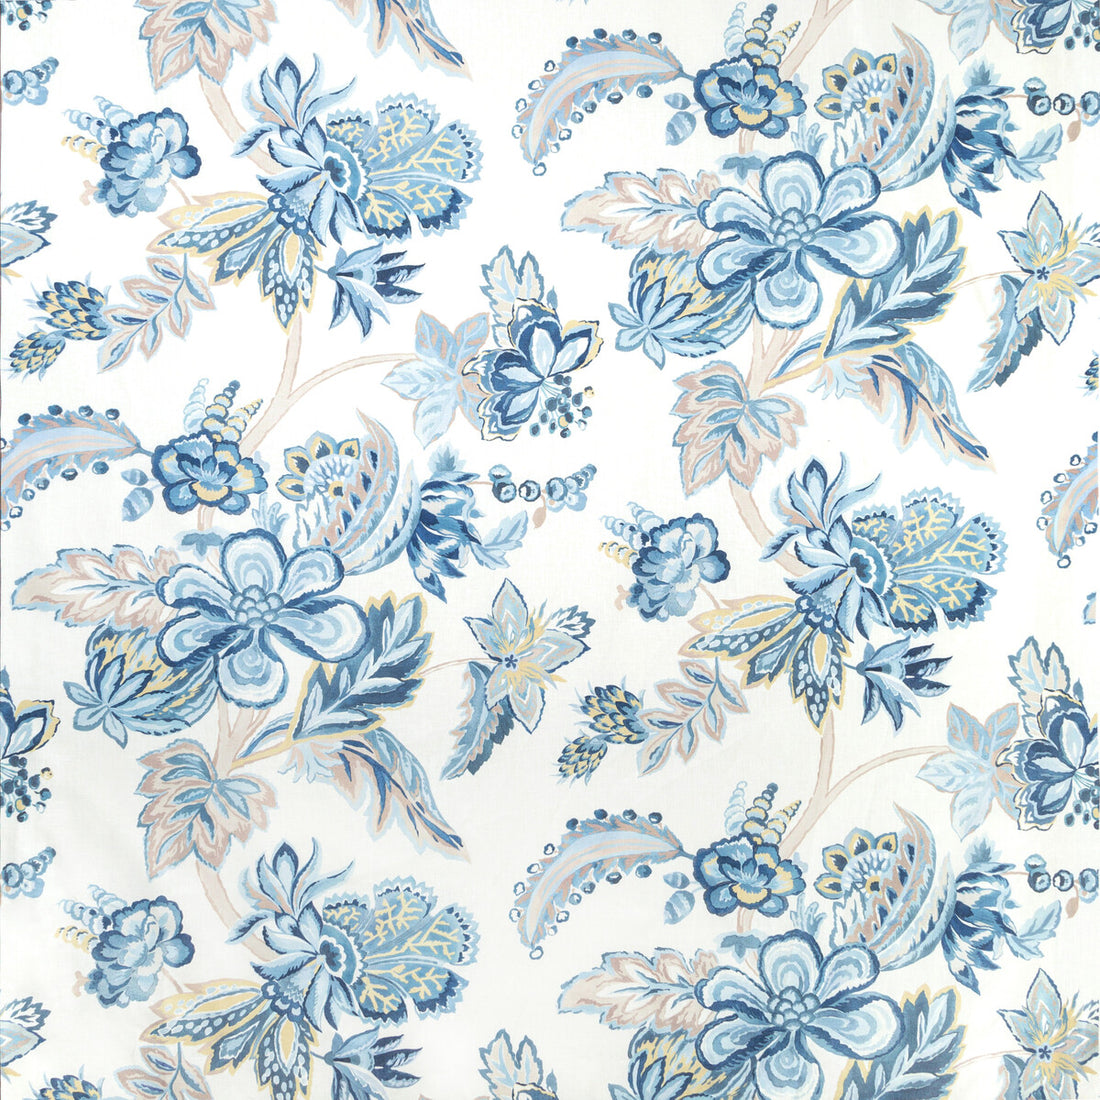 Augustine Print fabric in blue color - pattern 2020191.515.0 - by Lee Jofa in the Avondale collection